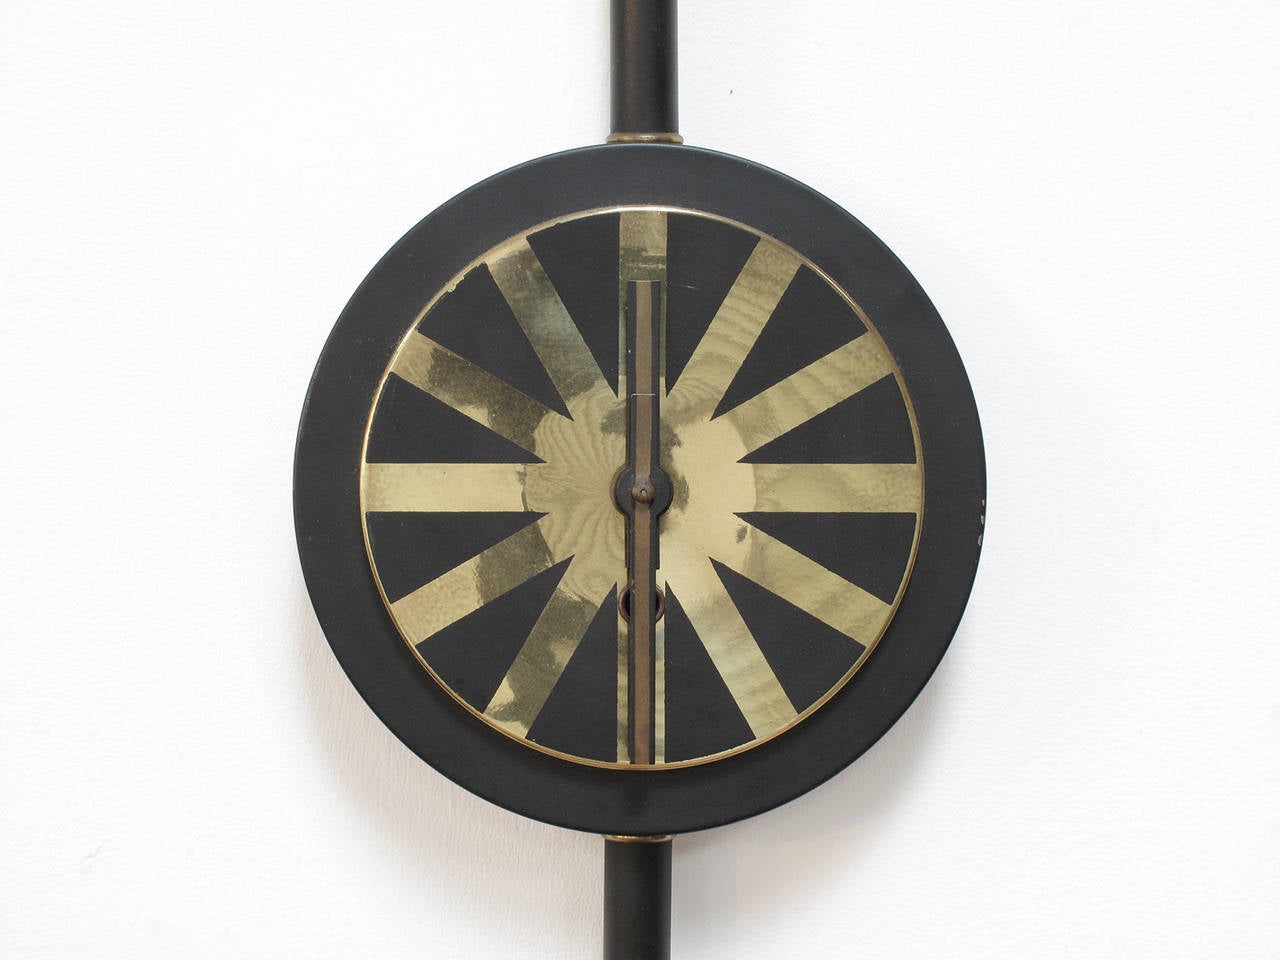 Modernist wall clock in brass and metal, made in Germany, 1957

In the style of an asterisk wall clock by George Nelson & Associates, this wall clock echos the Werner Wersktatte and Hagenhauer design movements with its contrasting black